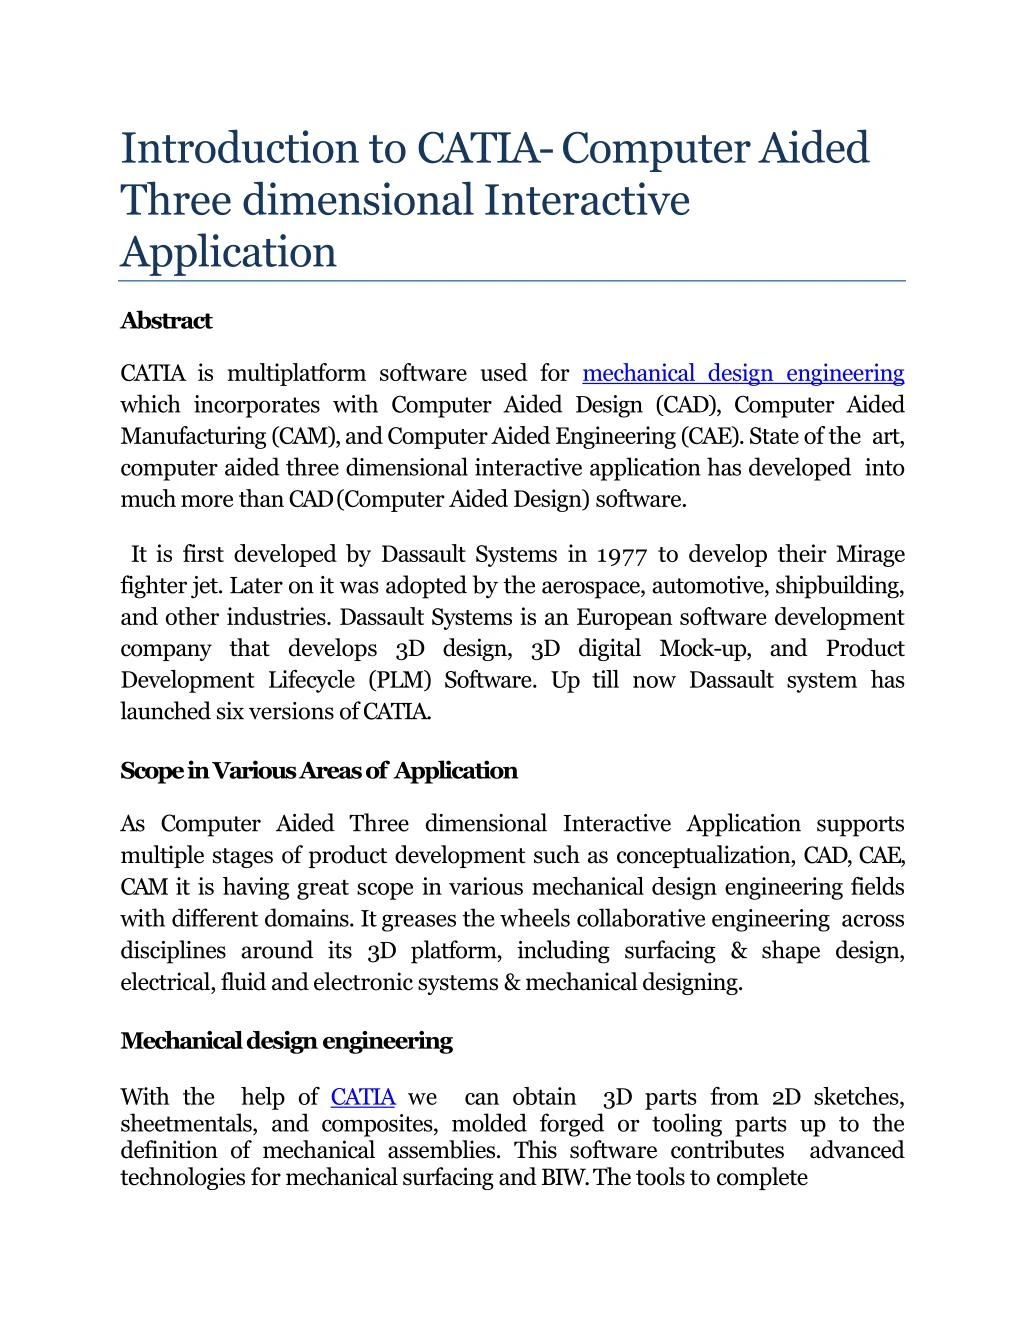 introduction to catia computer aided three dimensional interactive application